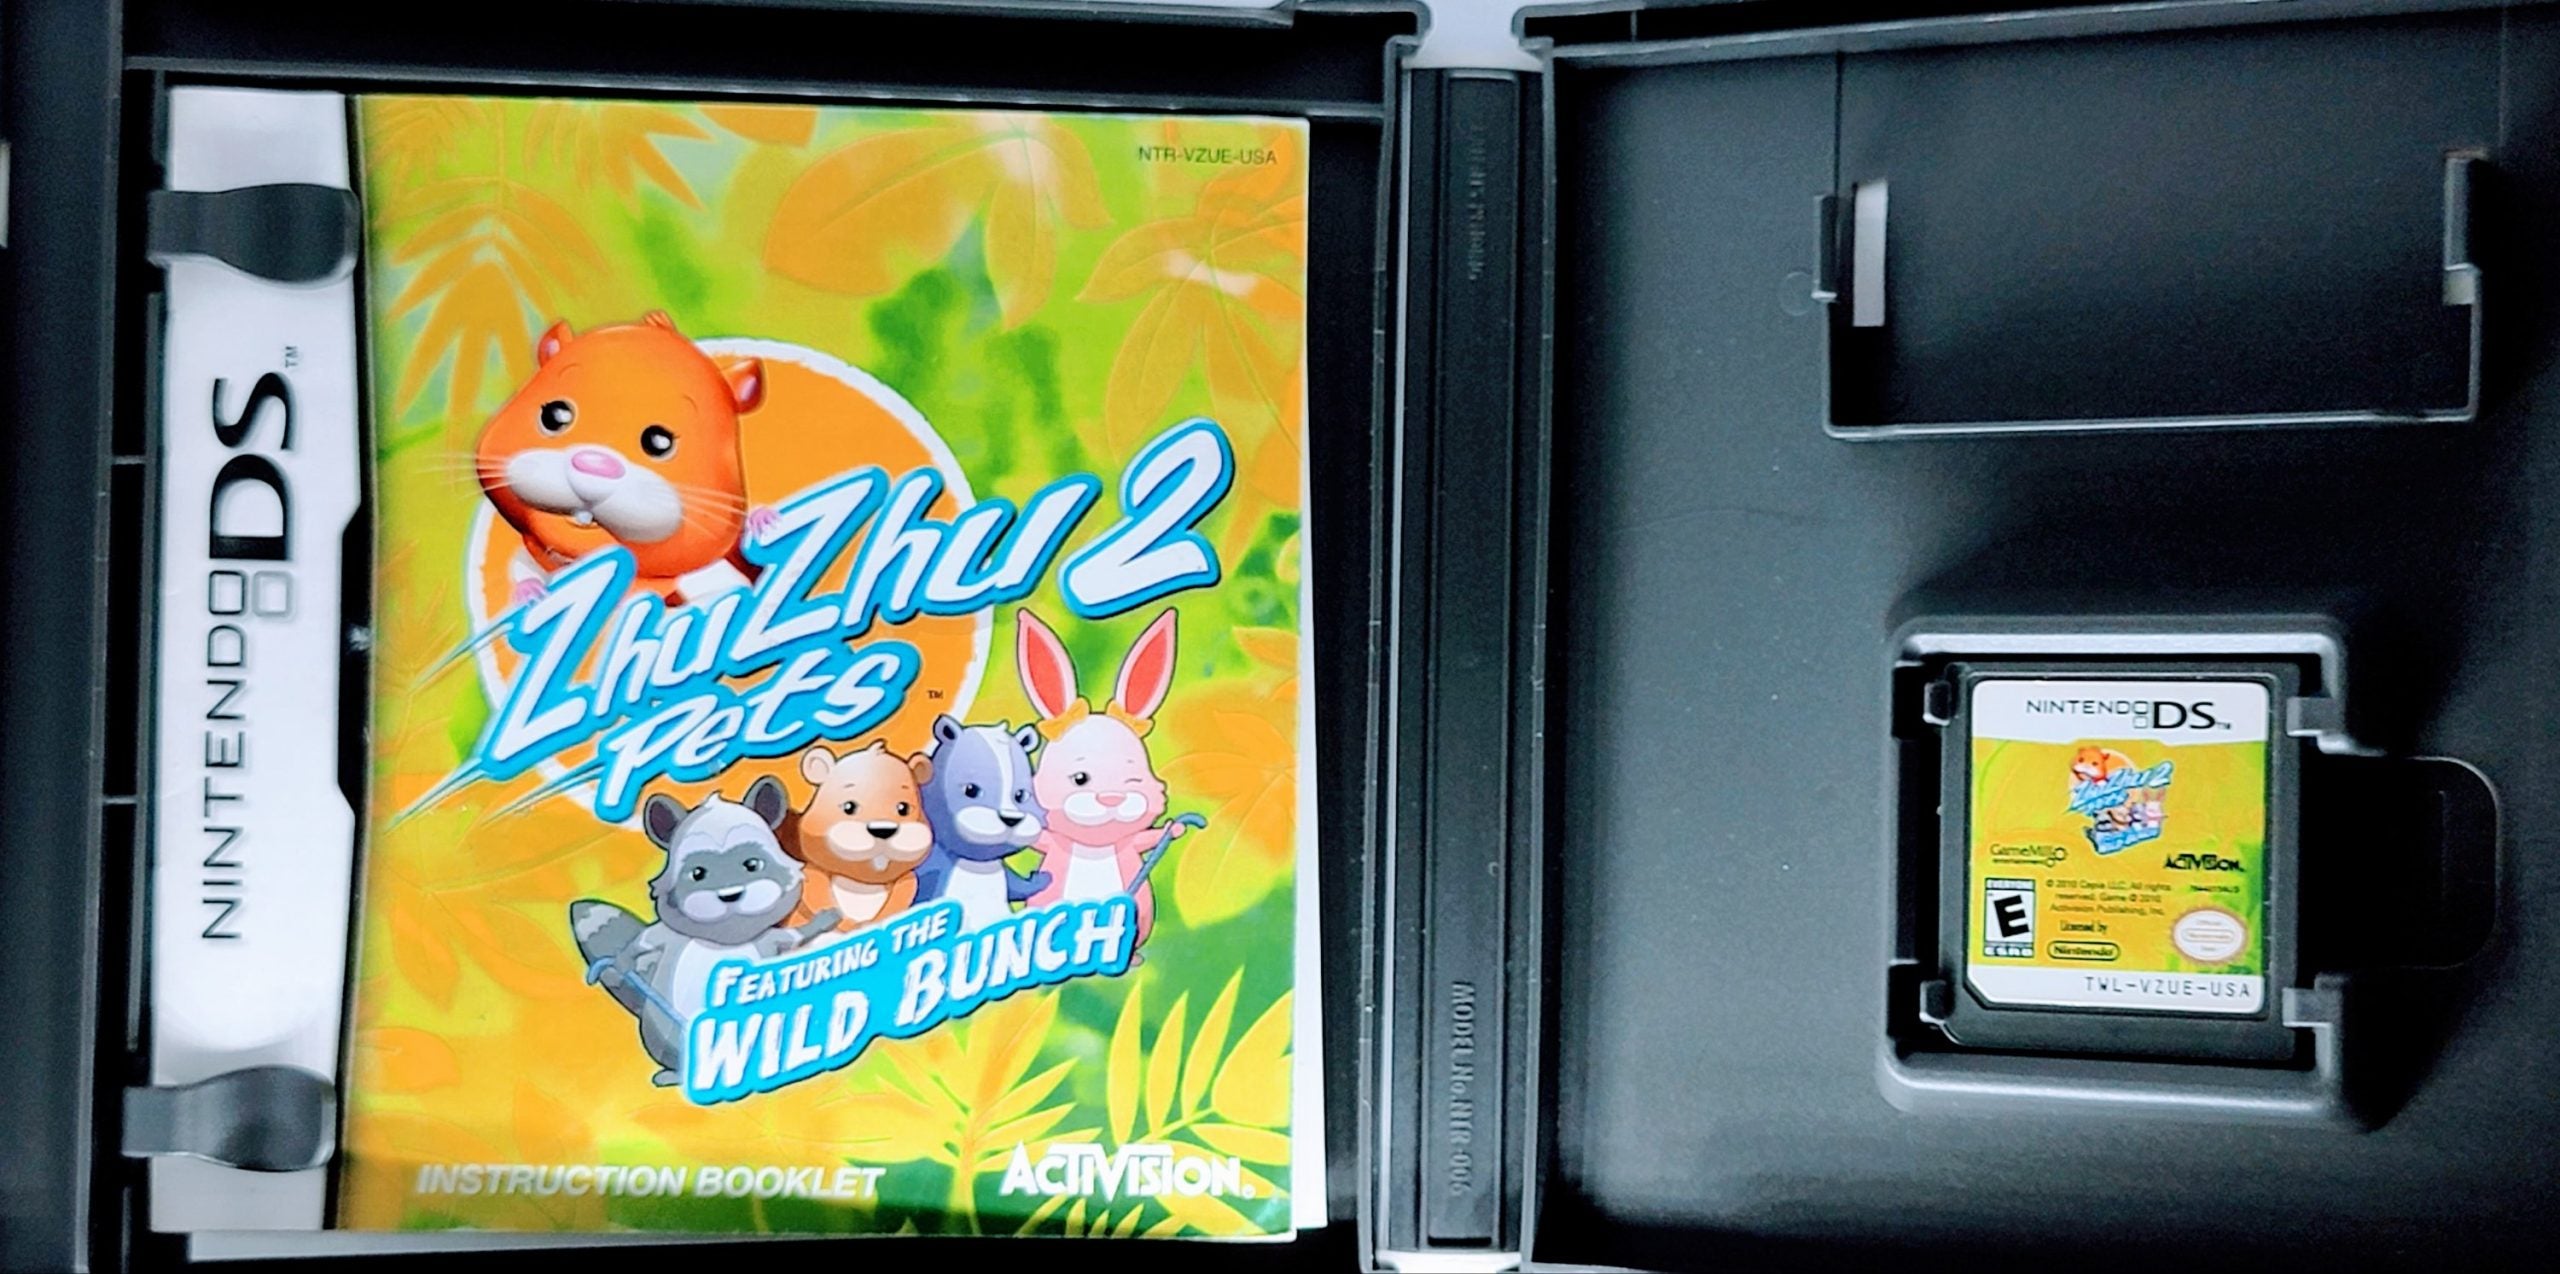 Zhu Zhu Pets 2 Featuring the Wild Bunch Nintendo DS: The Ultimate Furry Adventure!  Xclusive Collectibles   